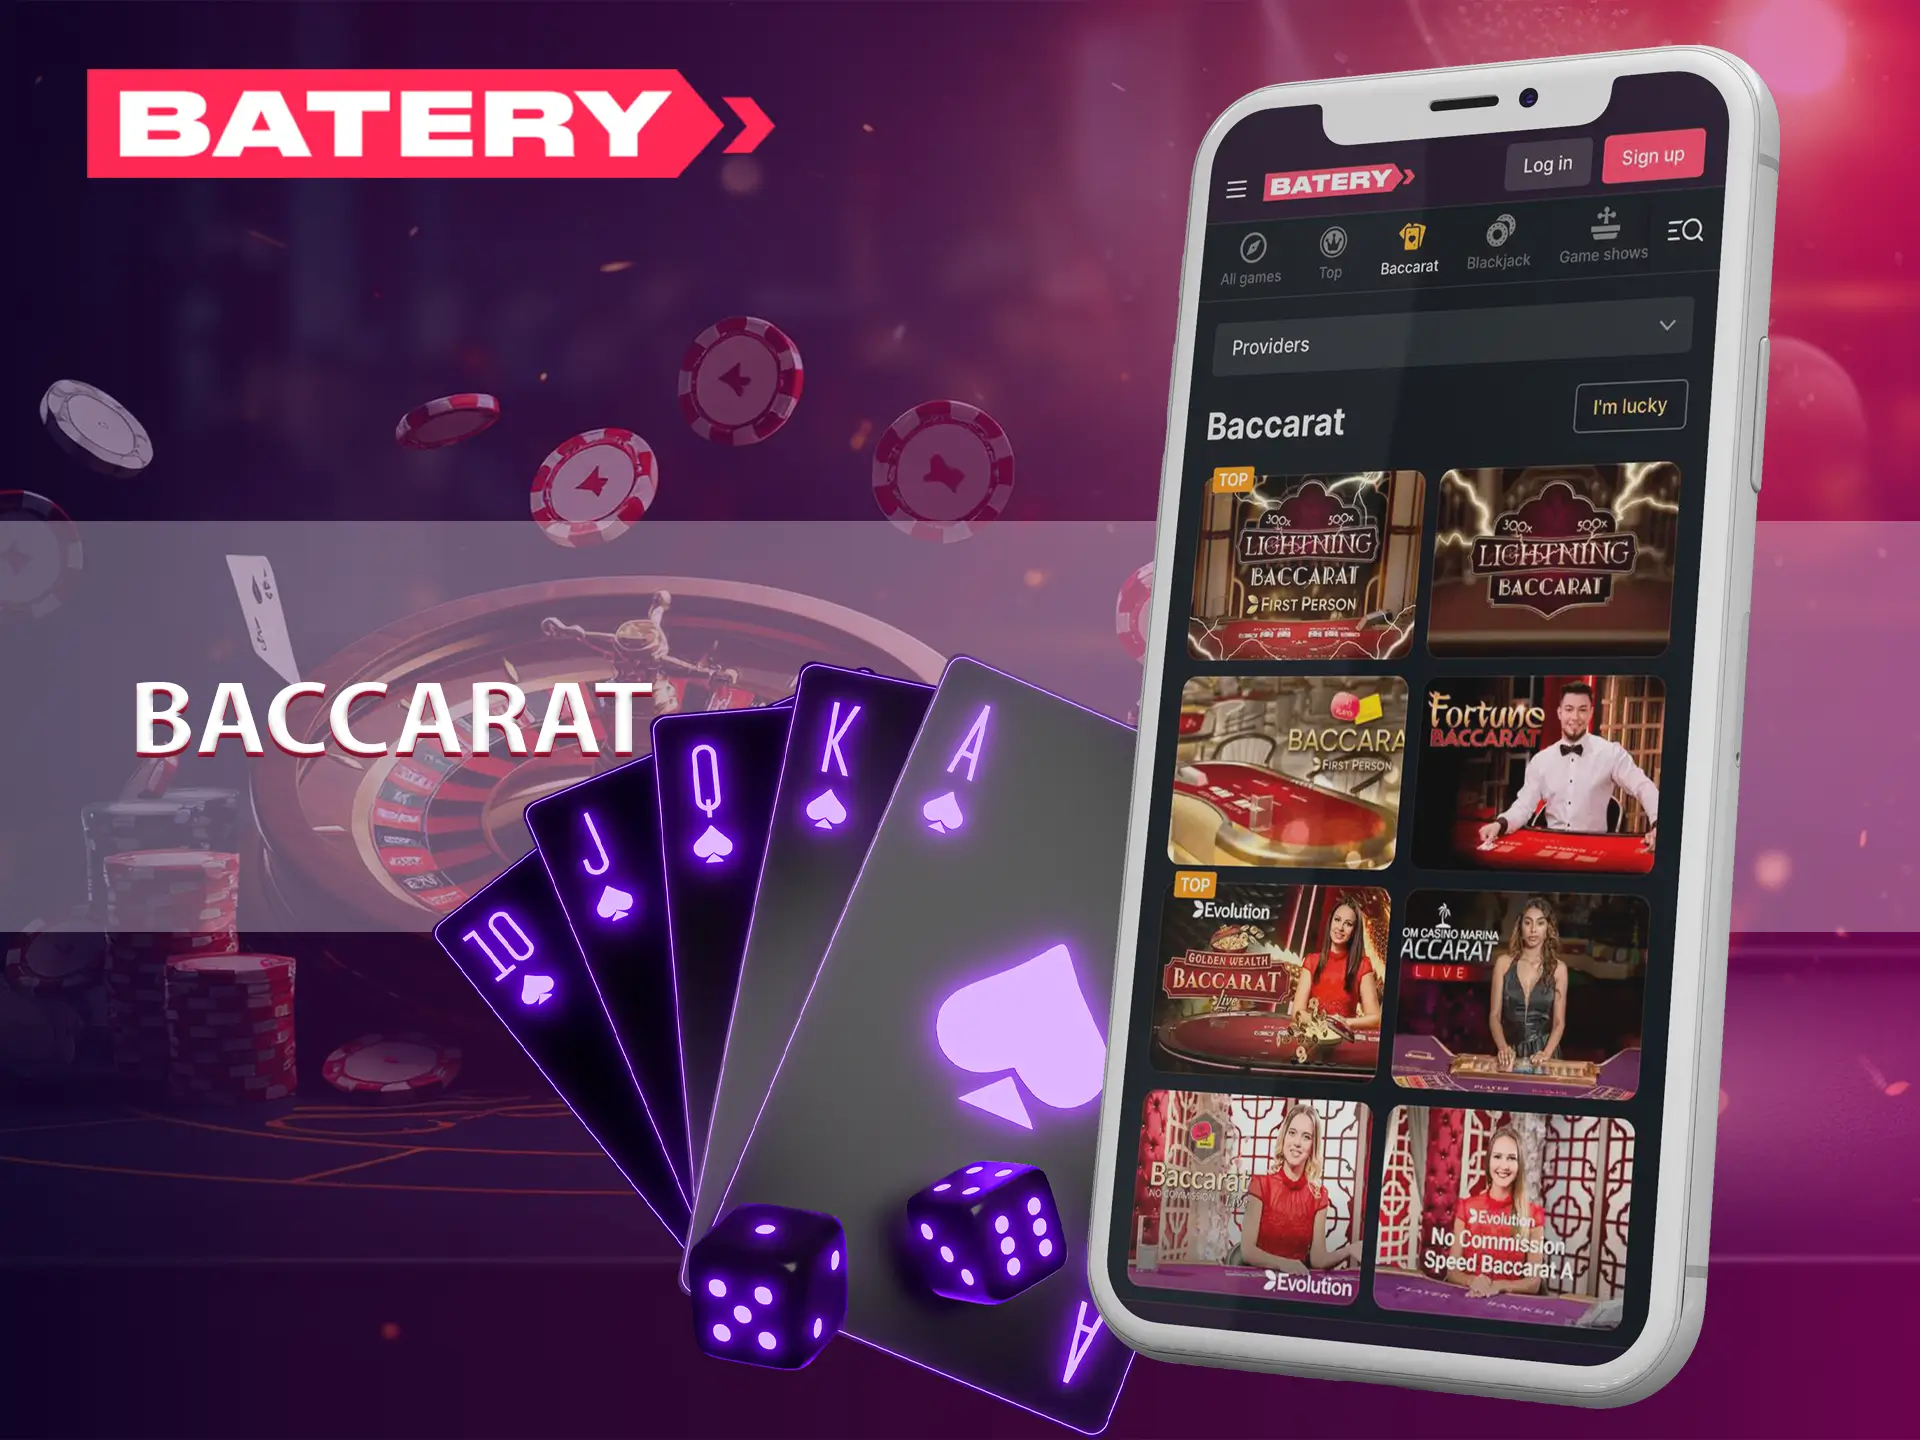 Accumulate the amount of points in baccarat and get a big win.